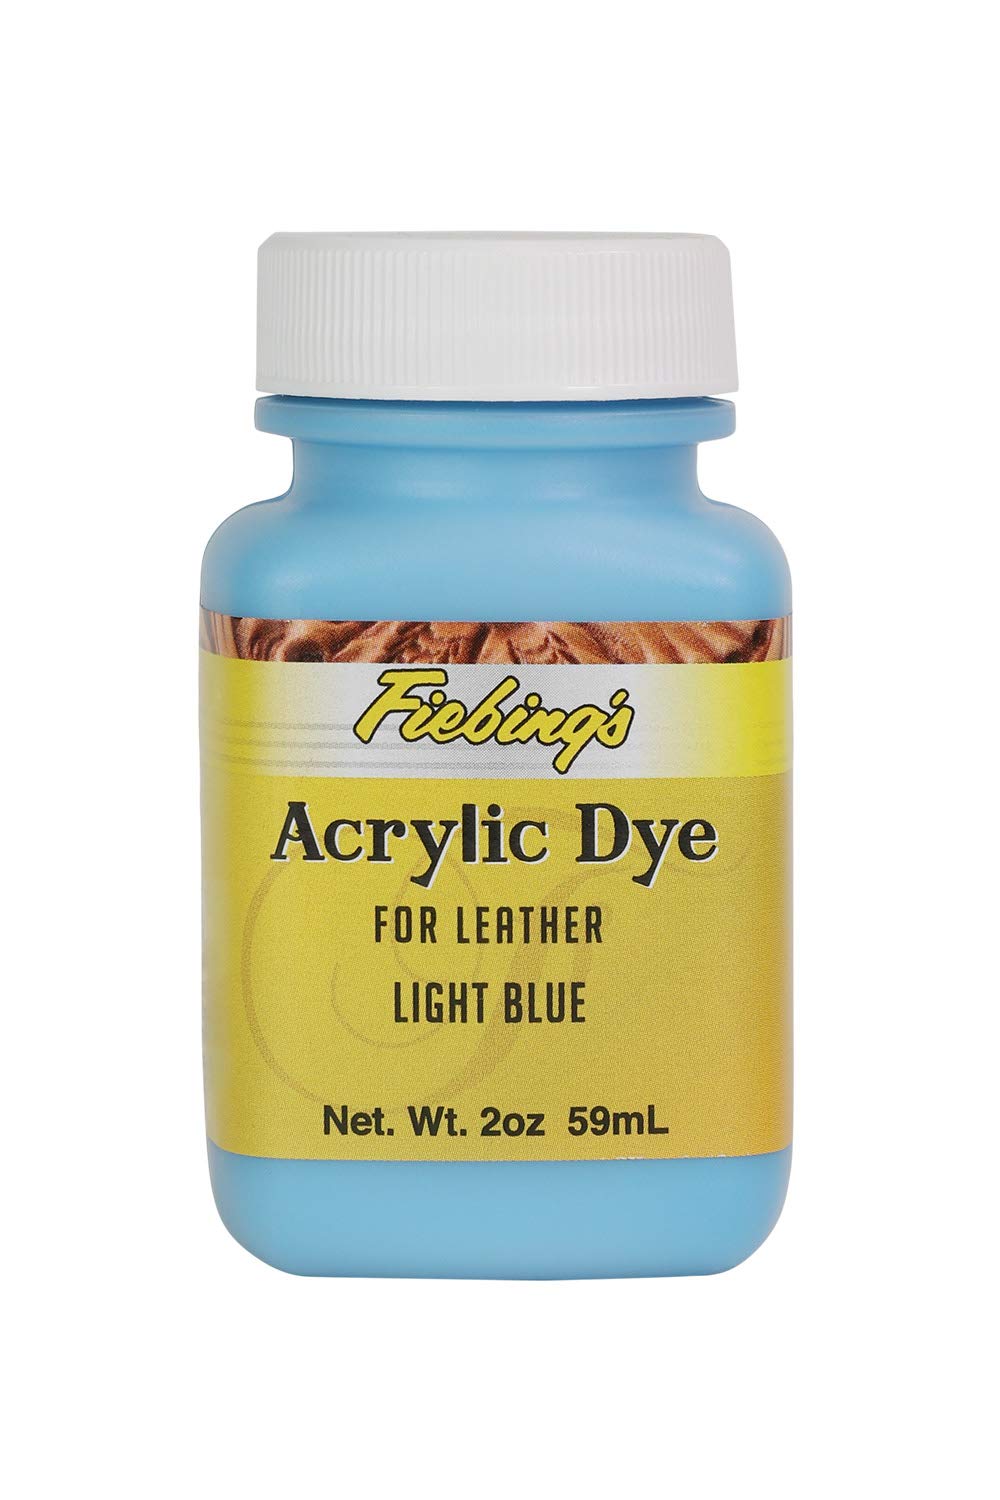 Fiebing's Acrylic Dye - Light Blue - 2oz - for Painting Leather Shoes, Bags, Designs, Scratches, Upholstery, etc